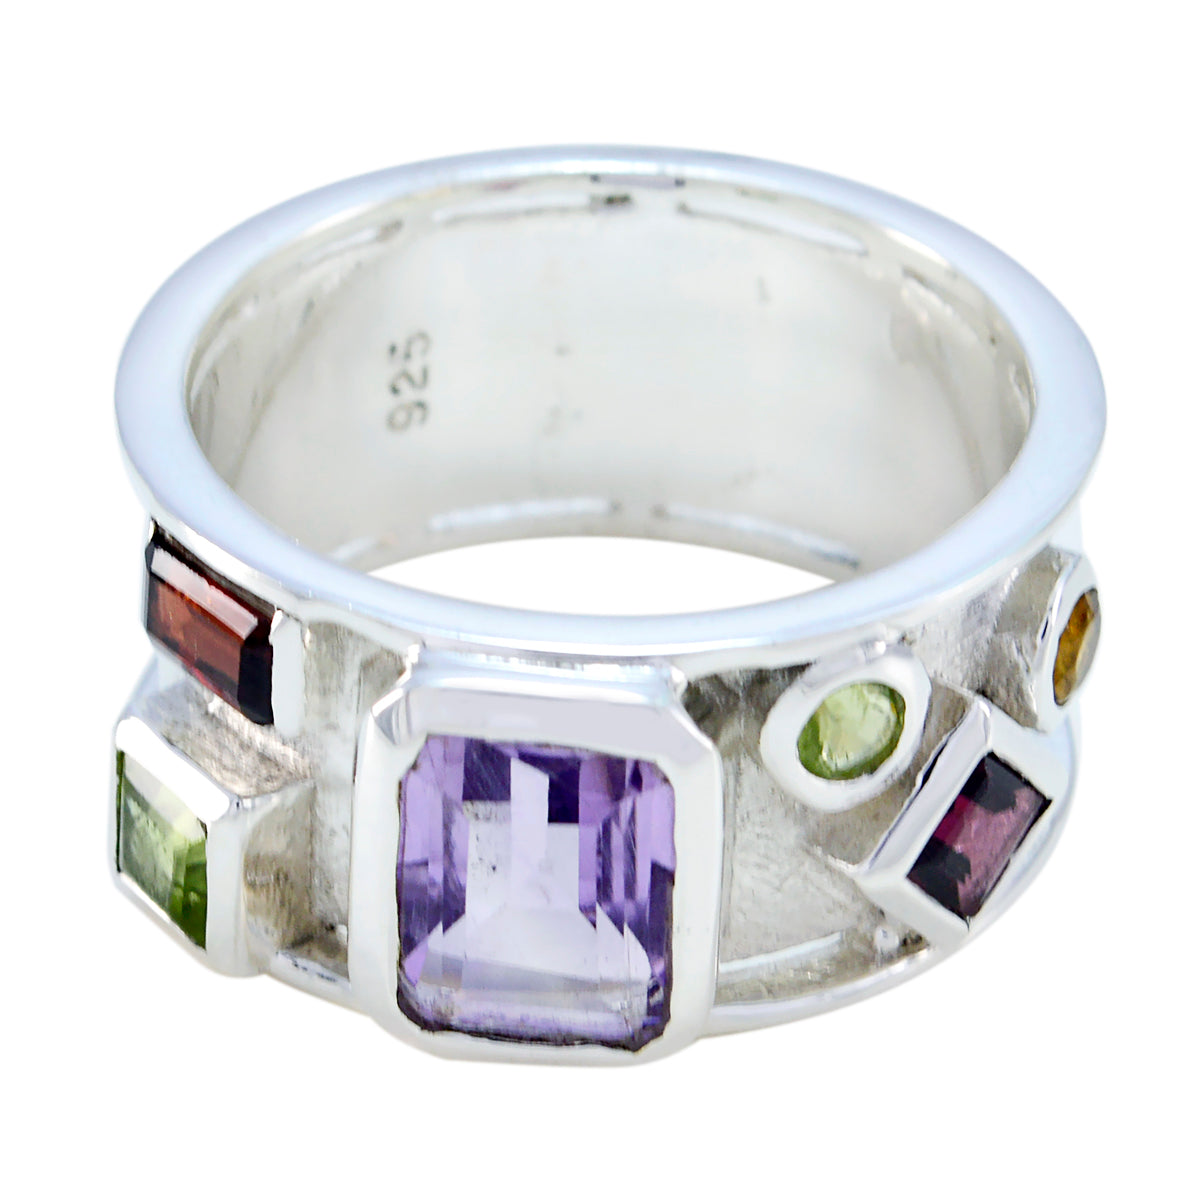 Cunning Gemstone Multi Stone Silver Ring Bridesmaids Jewelry Sets